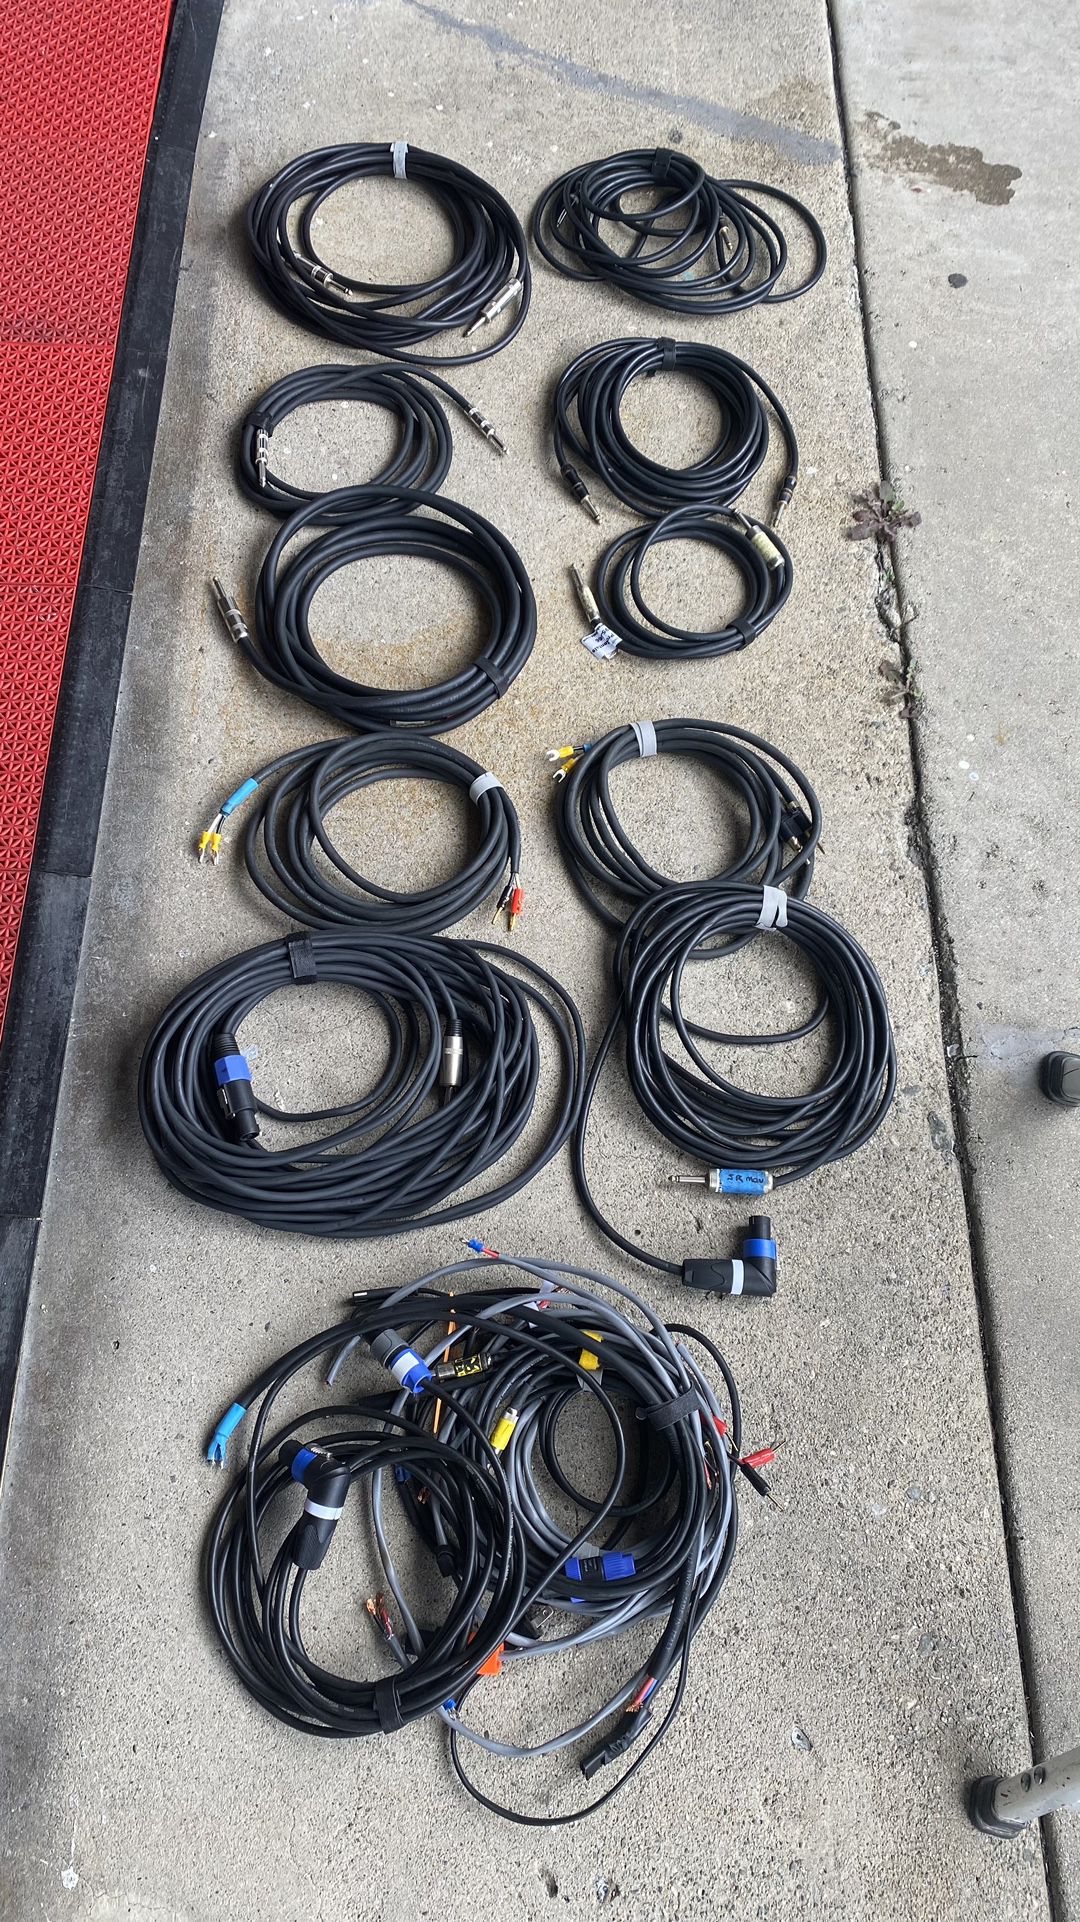 Audio Professional Cables DJ Equipment Made In USA 🇺🇸 Make Me Offer $$